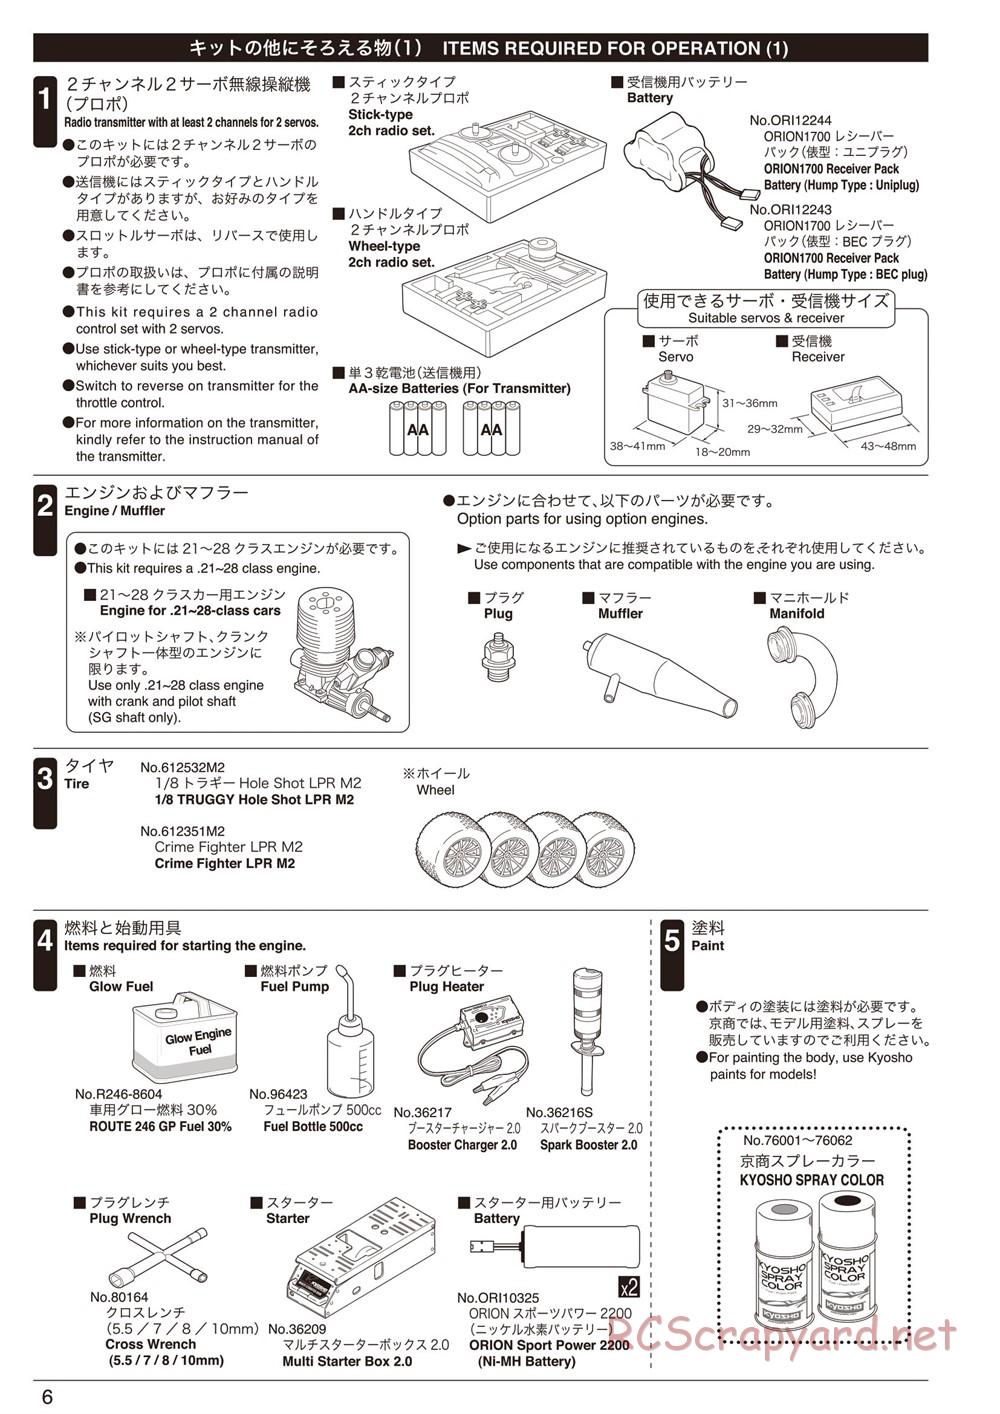 Kyosho - Inferno ST-RR Evo.2 - Manual - Page 10